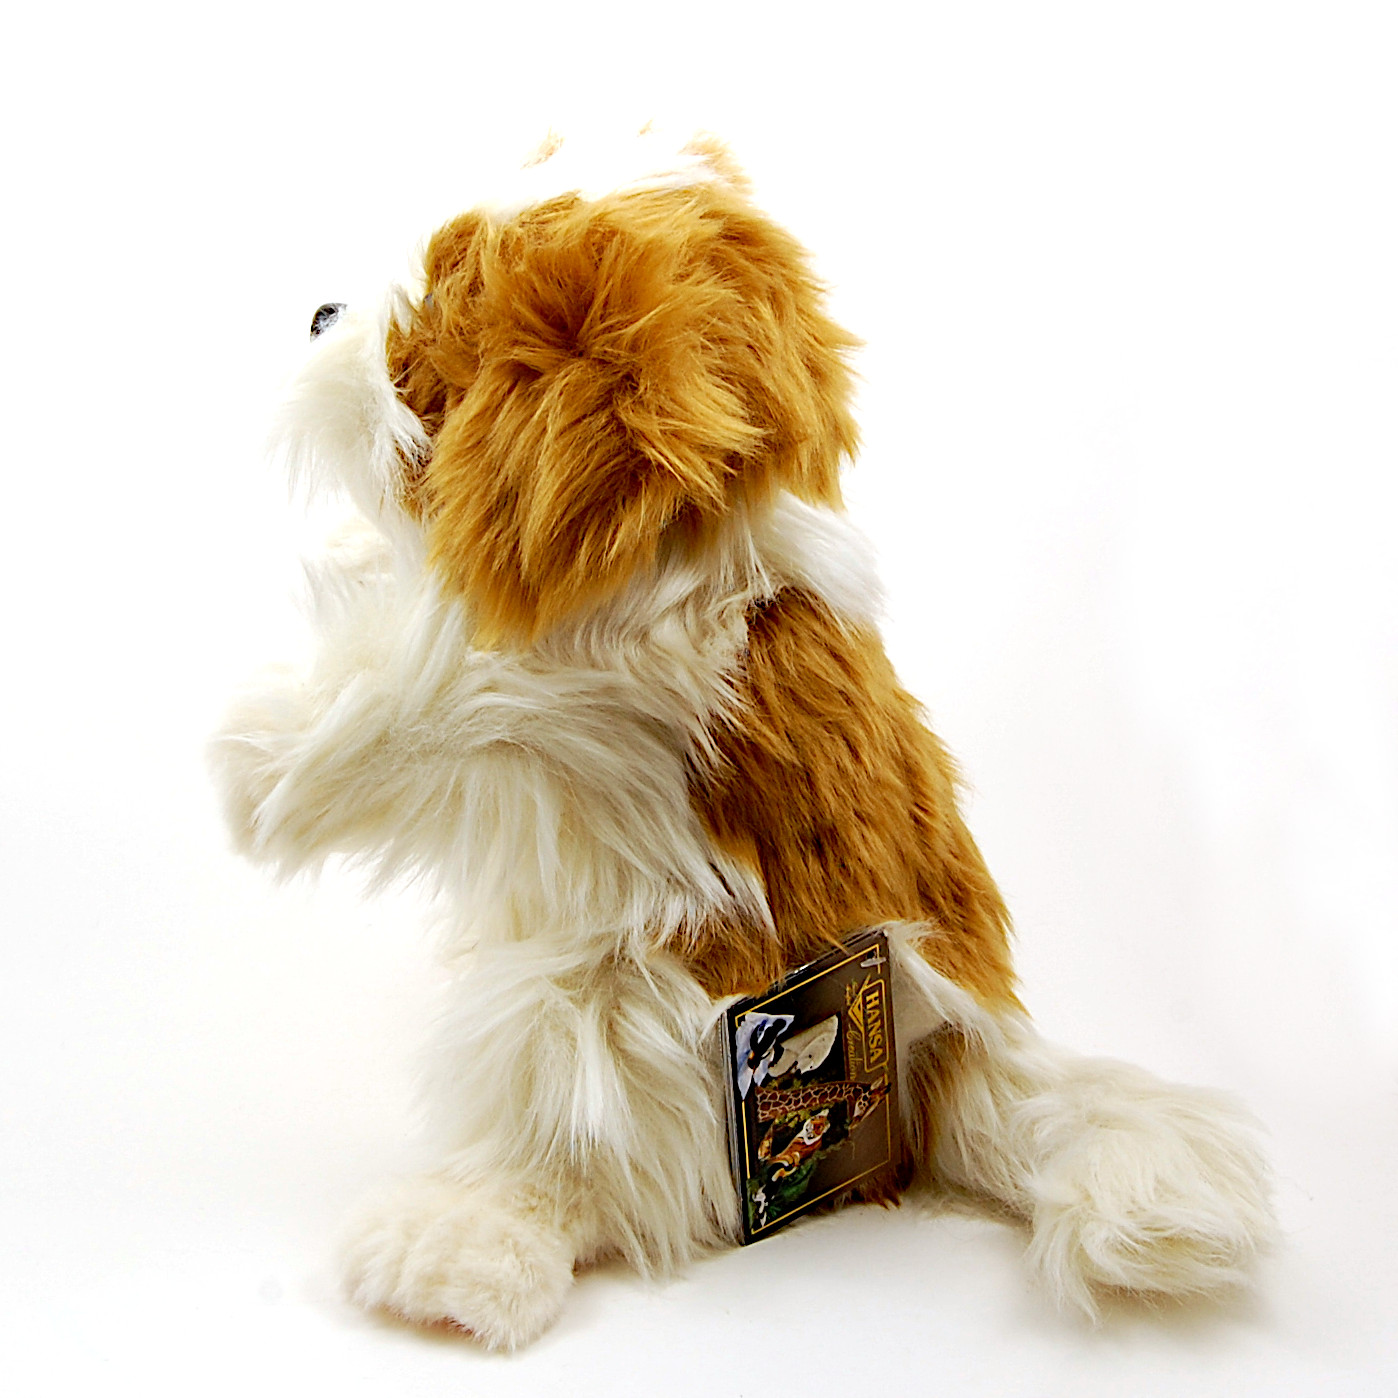 This Shih TZU Dog Hand Puppet Hansa True to Life Look Soft Plush Animal Learning Toy is made with love by Premier Homegoods! Shop more unique gift ideas today with Spots Initiatives, the best way to support creators.